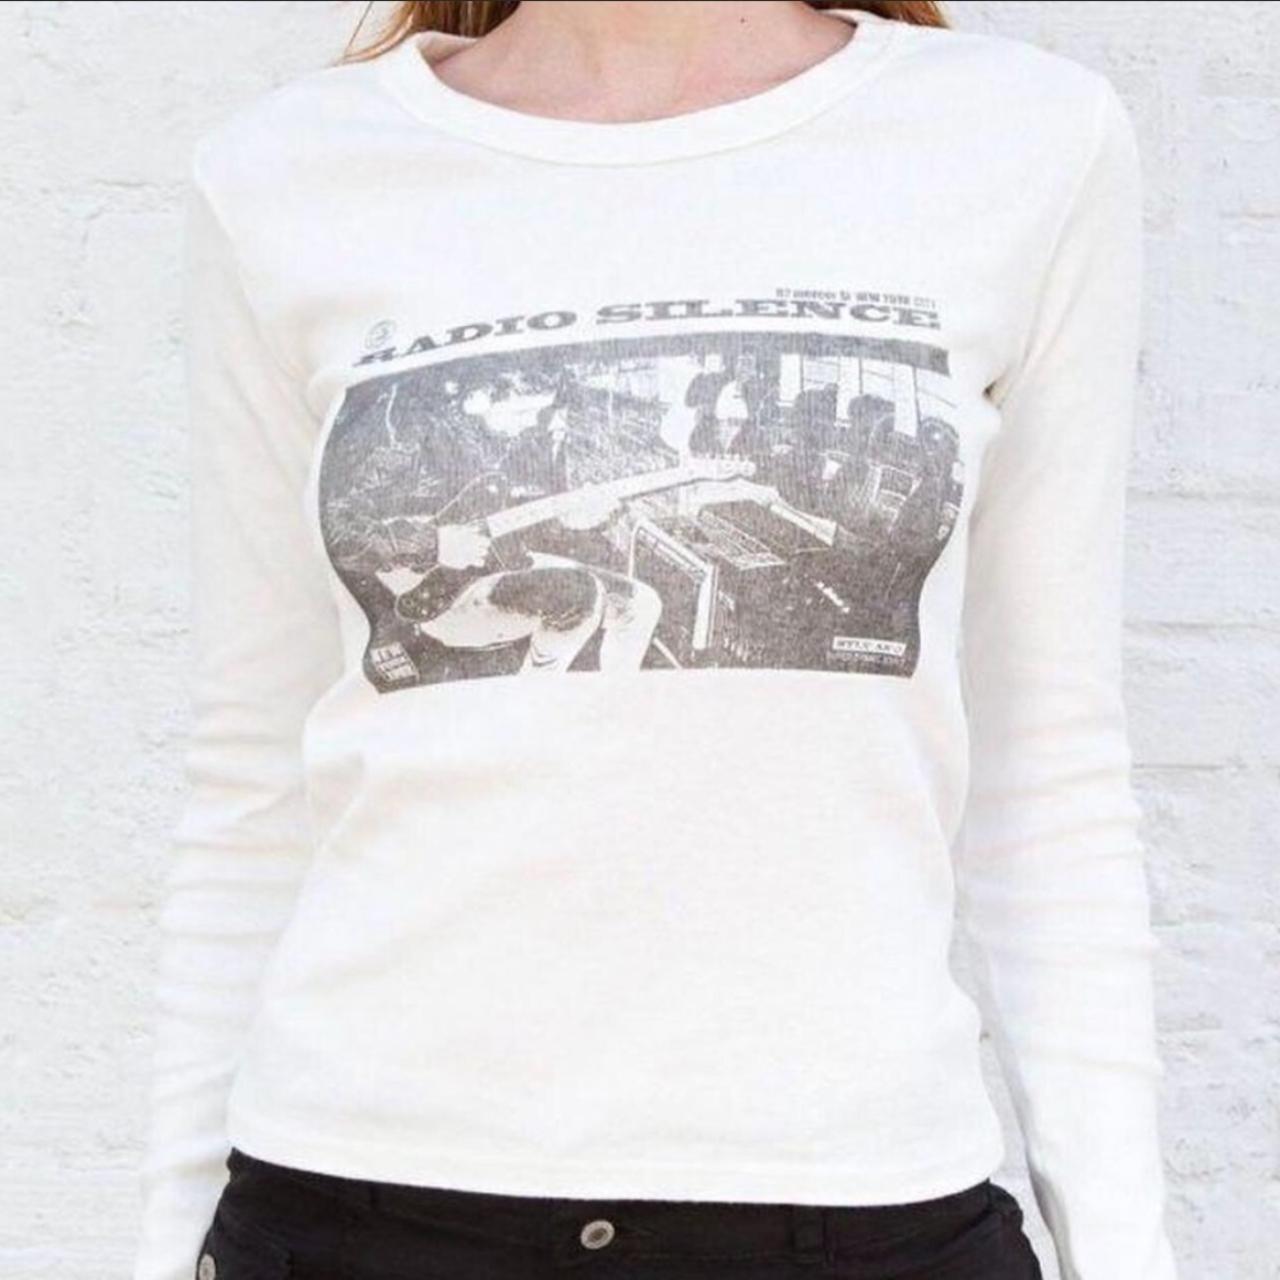 Brandy Melville long sleeve graphic tee. Super soft.